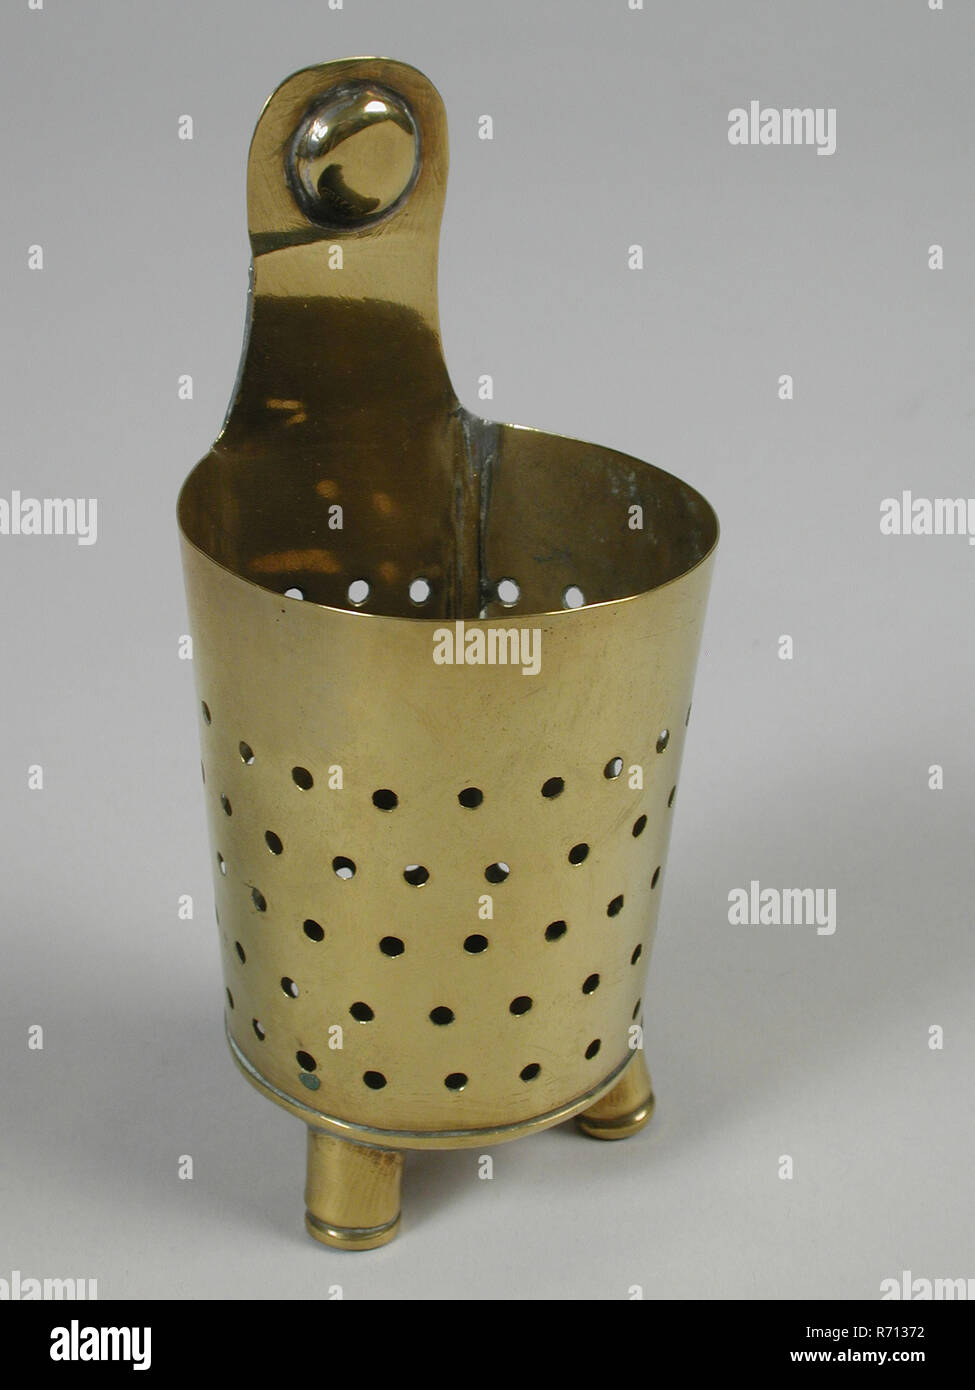 https://c8.alamy.com/comp/R71372/metal-worker-gresnich-yellow-copper-tea-leaves-colander-colander-sieve-kitchen-utensils-equipment-miniature-toy-relaxant-model-brass-filed-soldered-front-weakly-conical-and-perforated-backside-flat-and-merging-into-hanging-clip-three-legs-1868-sibilla-van-embden-playing-seven-kitchens-R71372.jpg